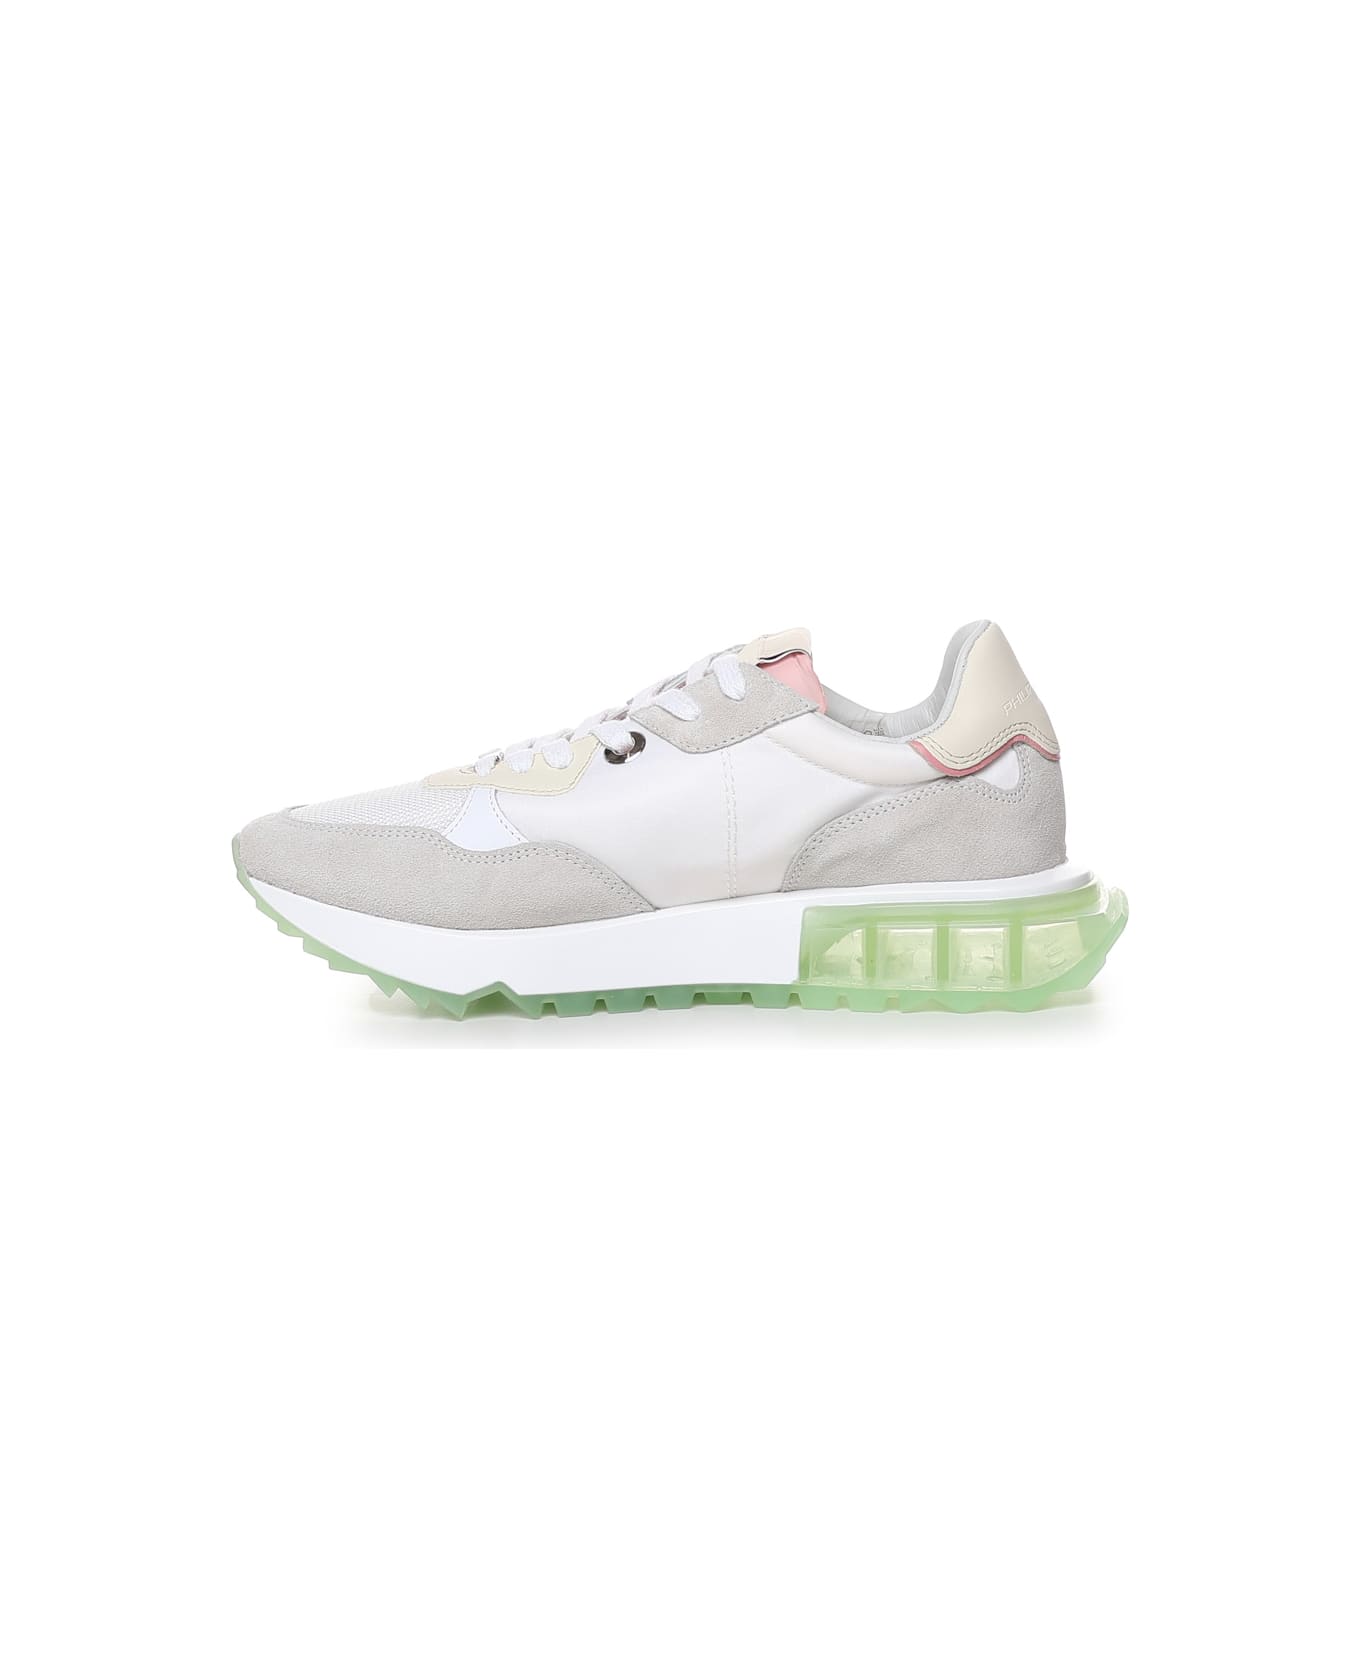 Philippe Model Sneakers With Contrasting Sole - MONDIAL POP_BLANC ROSE